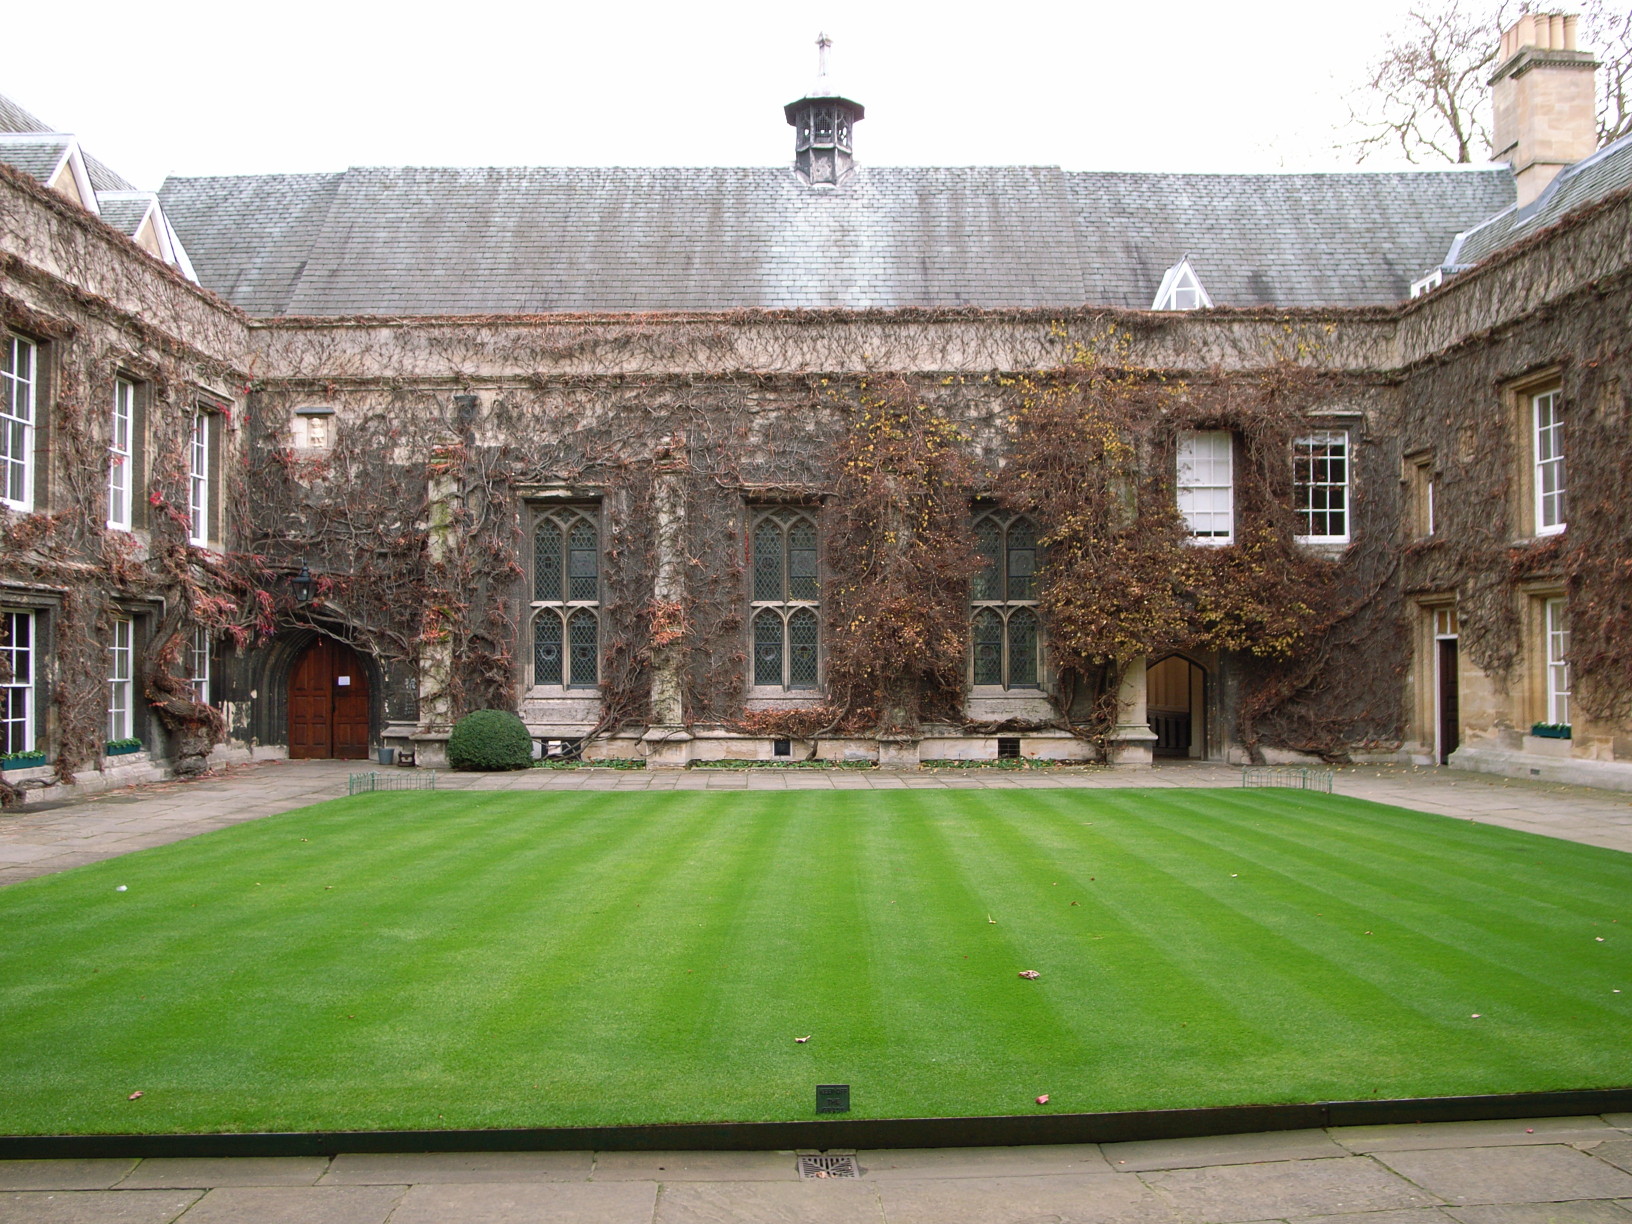 two-storey, ivy-covered stone buildings with ornate windows, surrounding a stripey lawn